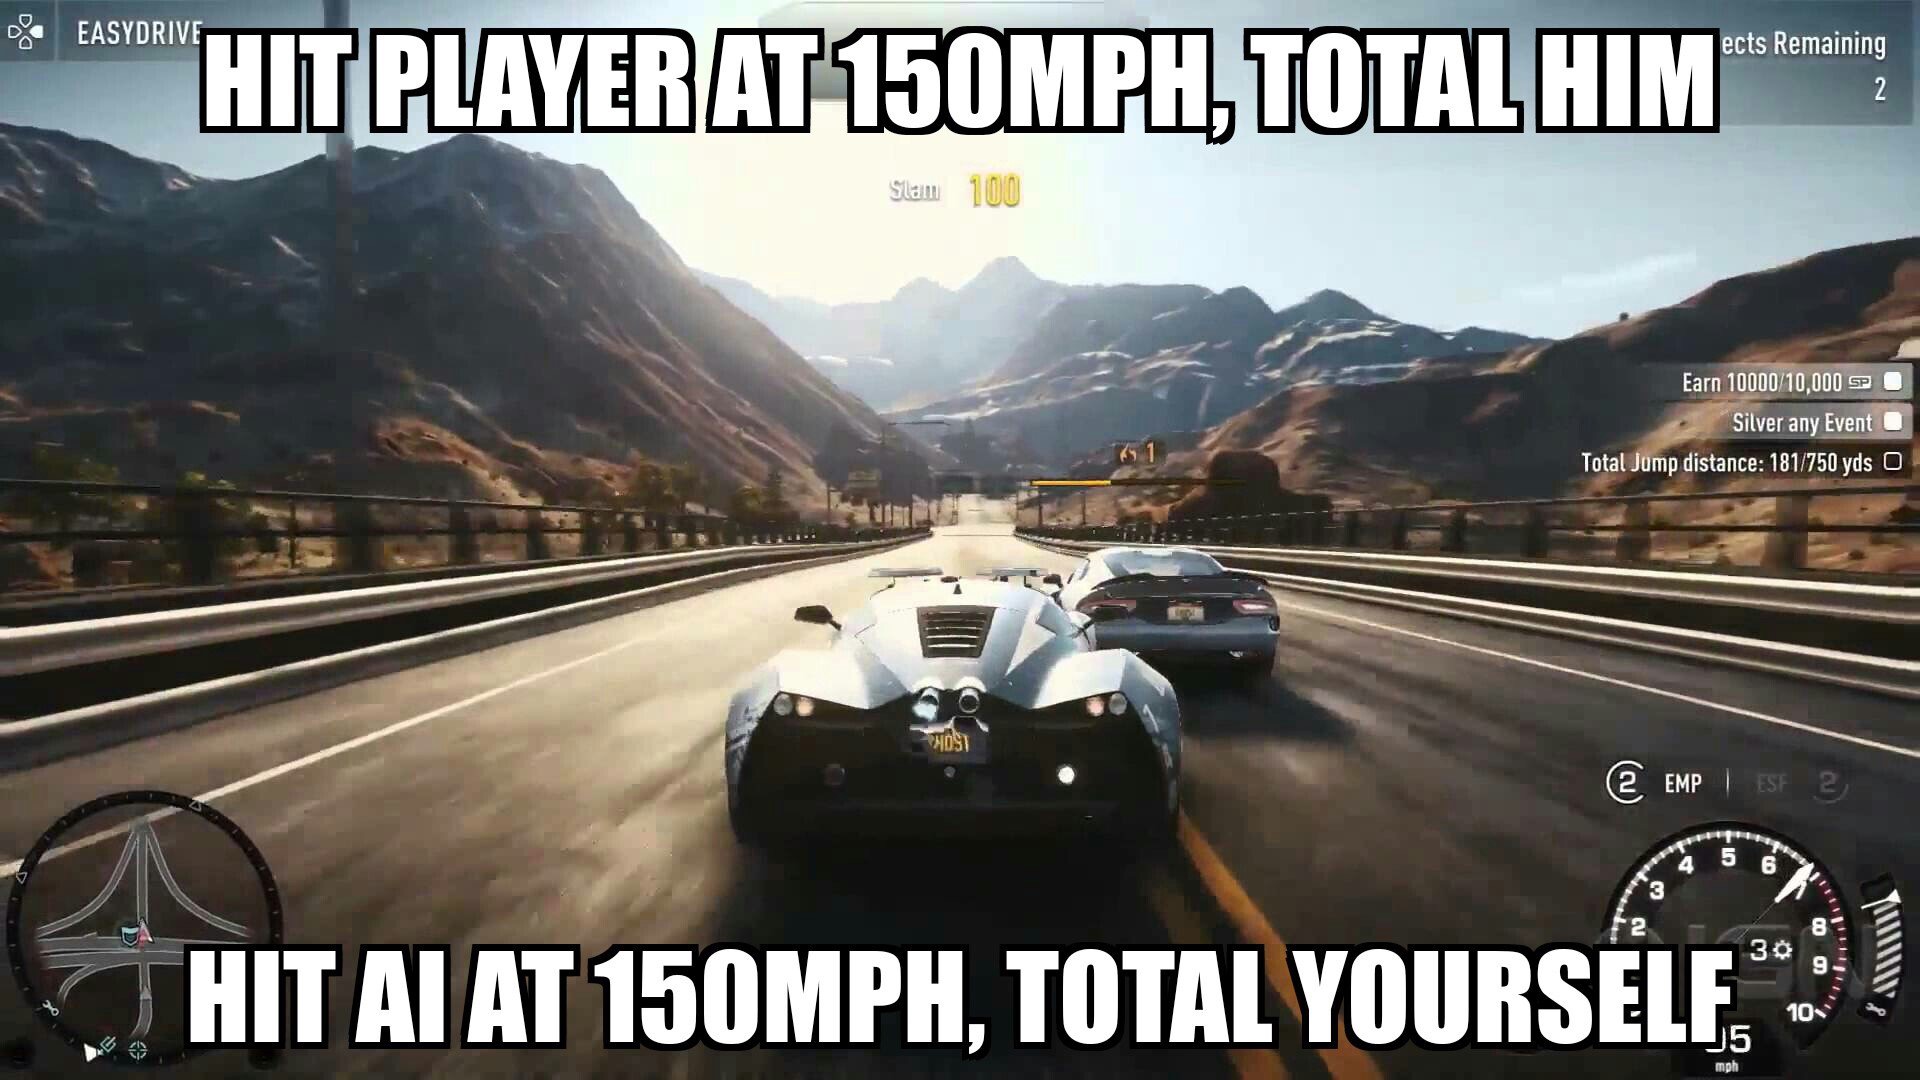 nfs rivals memes - Easydrive ects Remaining "Hit Player At 150MPH, Total Him Slam 100 Earn 1000010,000 S . Silver any Event Total Jump distance 181750 yds o Host @ Emp Esf 3 30 Hit Aiat 150MPH, Total Yourself" 10 mph